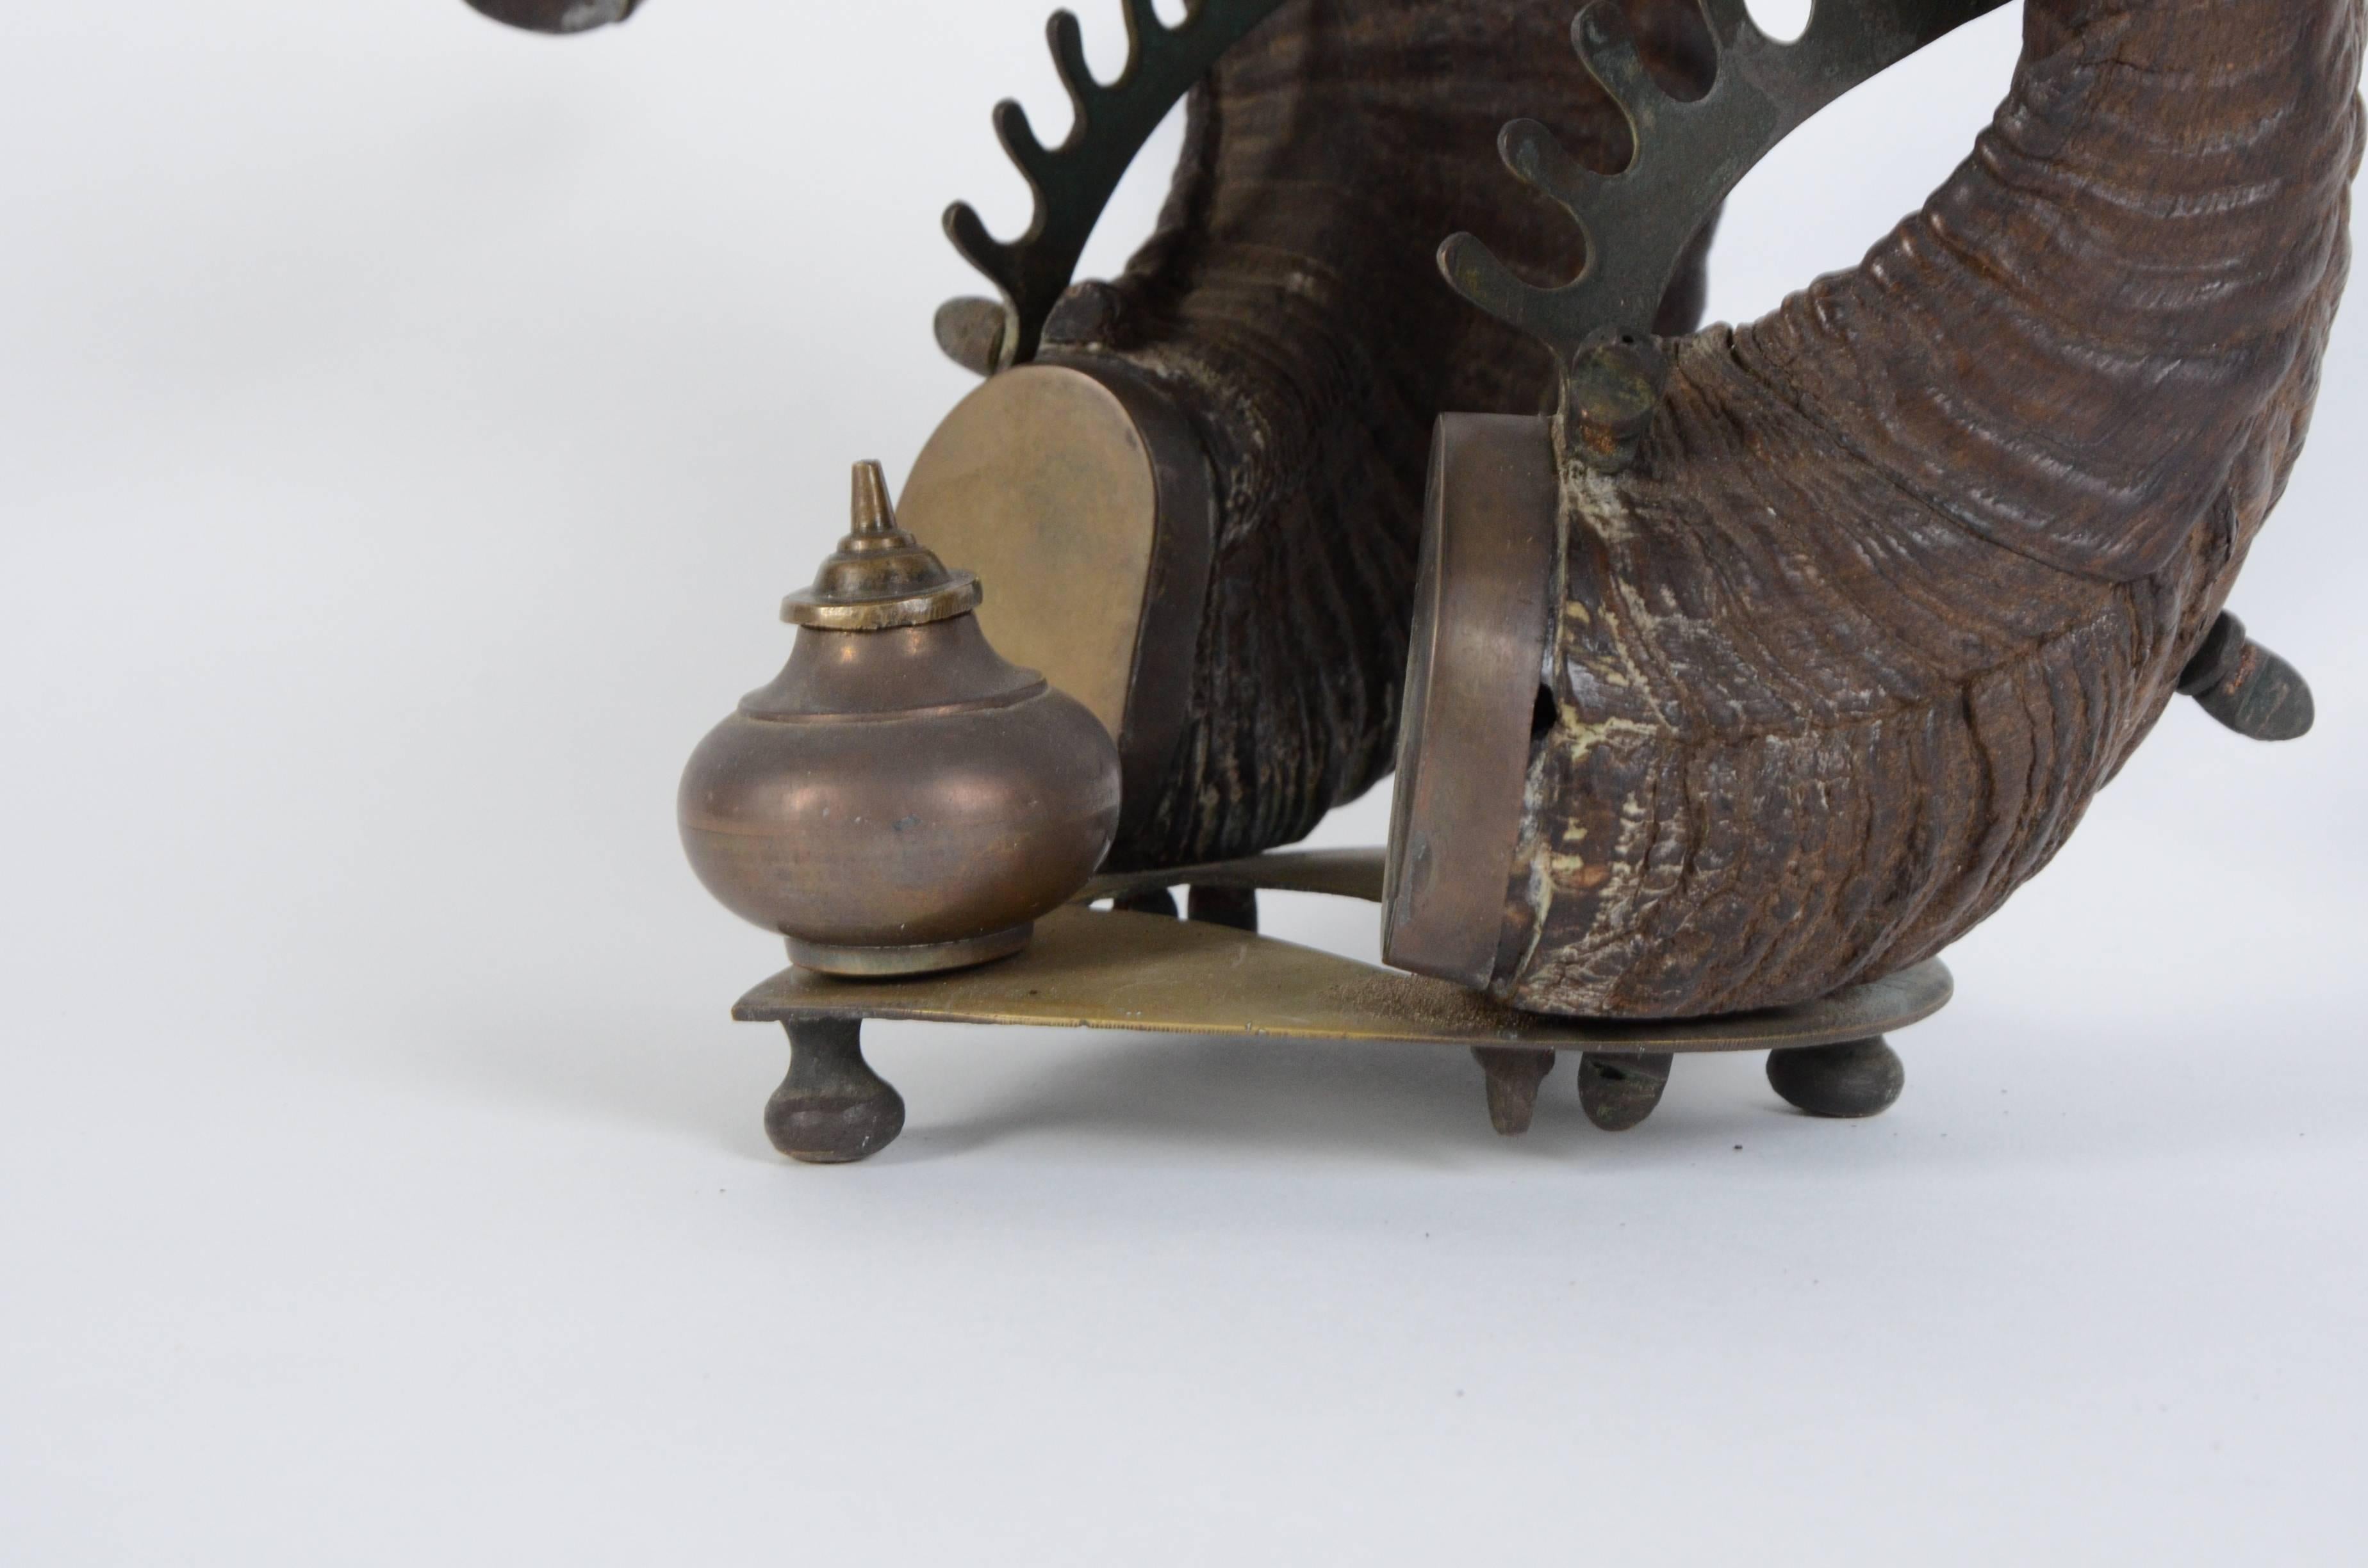 A 19th century Anglo-Indian rams horn inkwell having decorative brass Hindu deities, quill pen supports and ink pot.